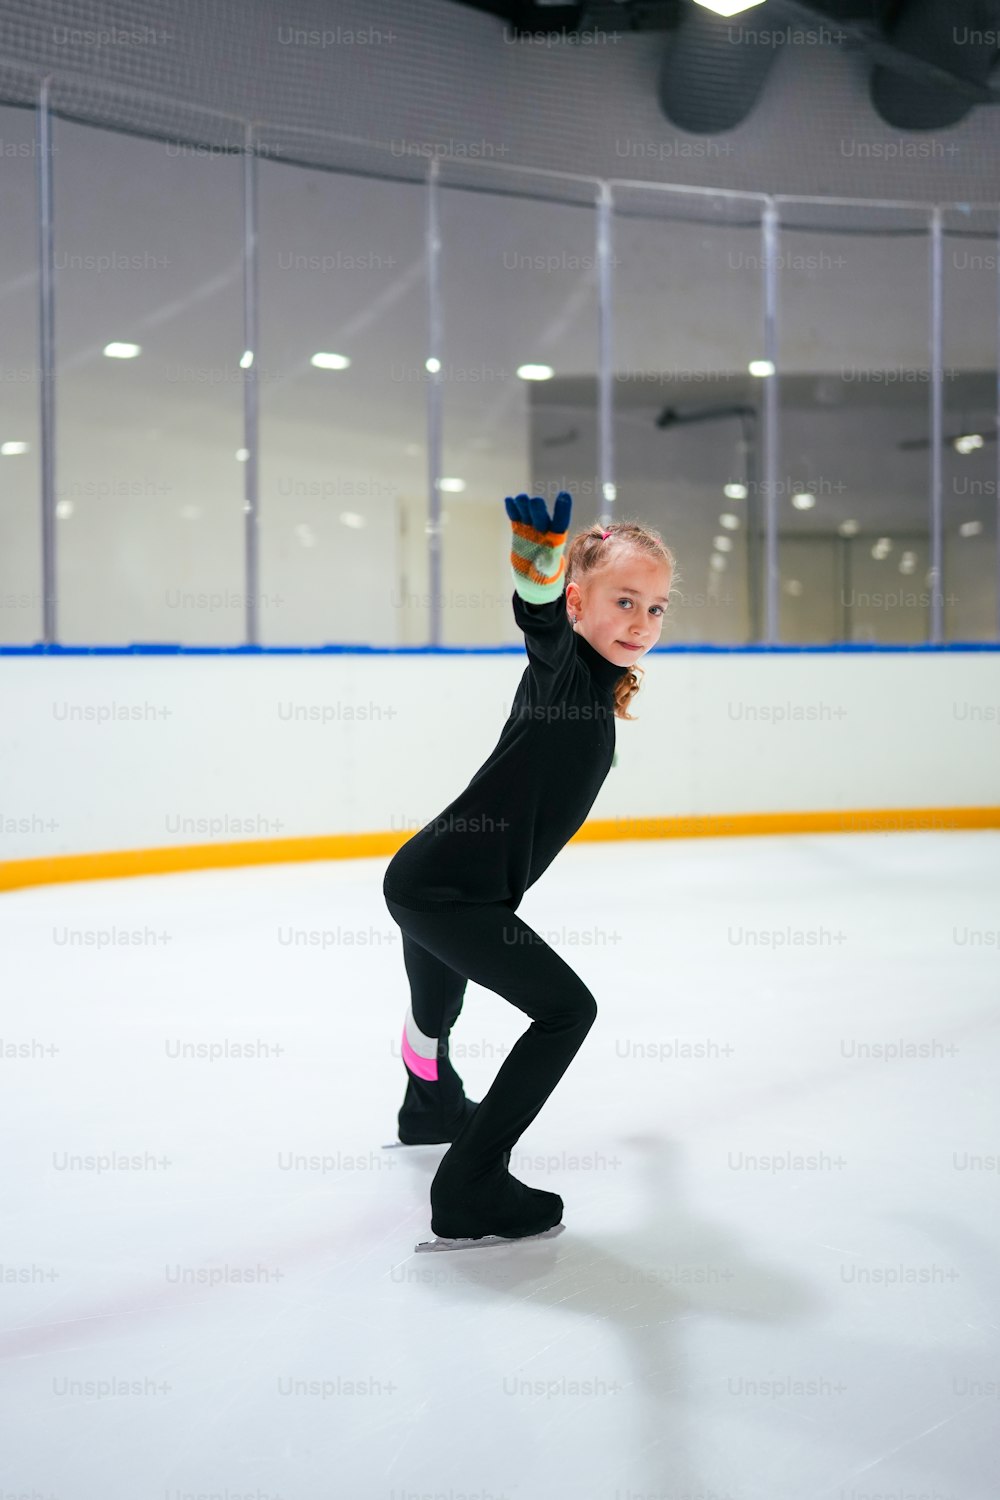 a woman is skating on an ice rink